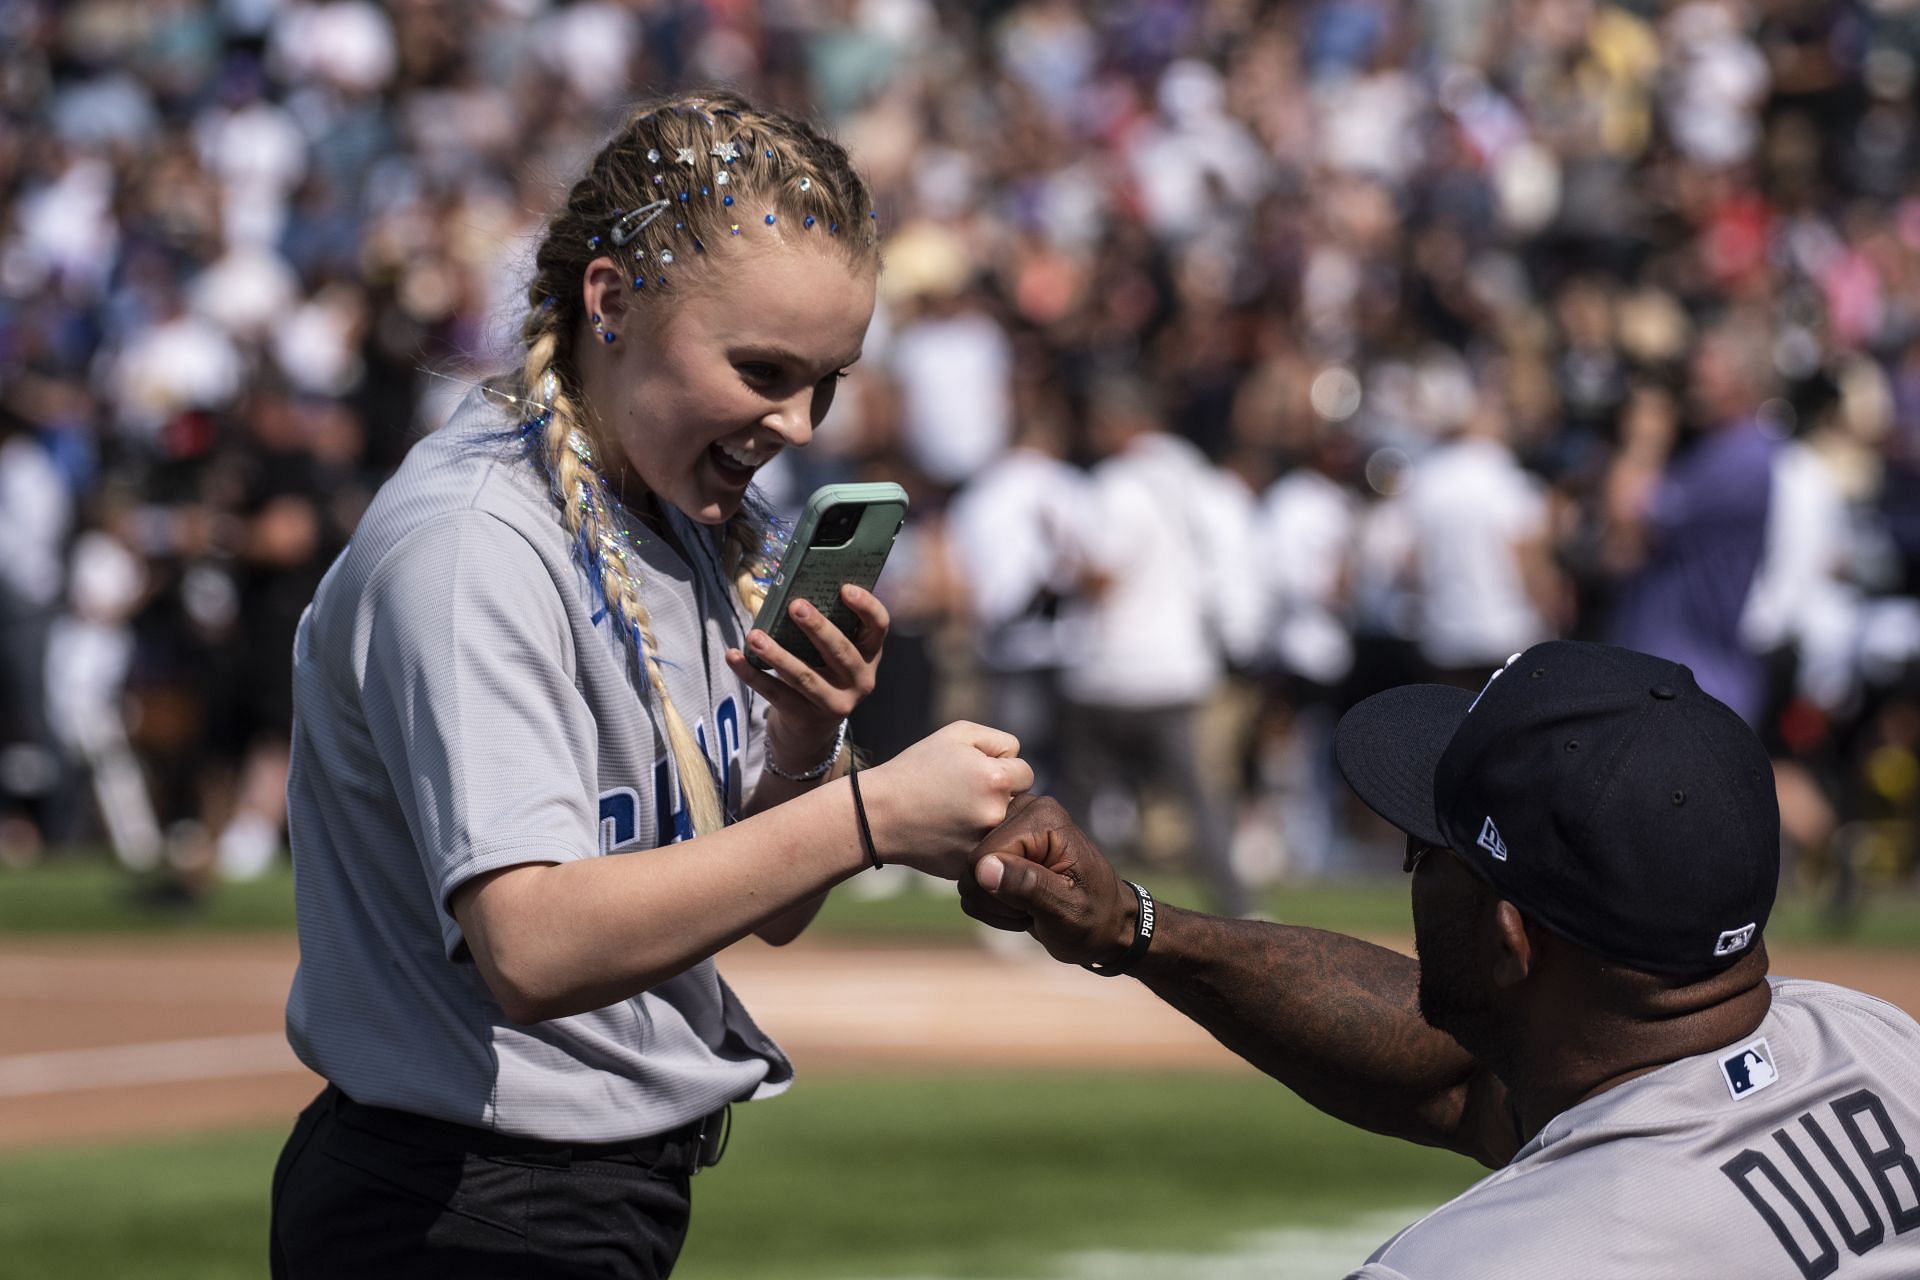 jojo siwa MLB all-star celebrity softball game (dont judge me, this was so  powerful, she did it for the gays)